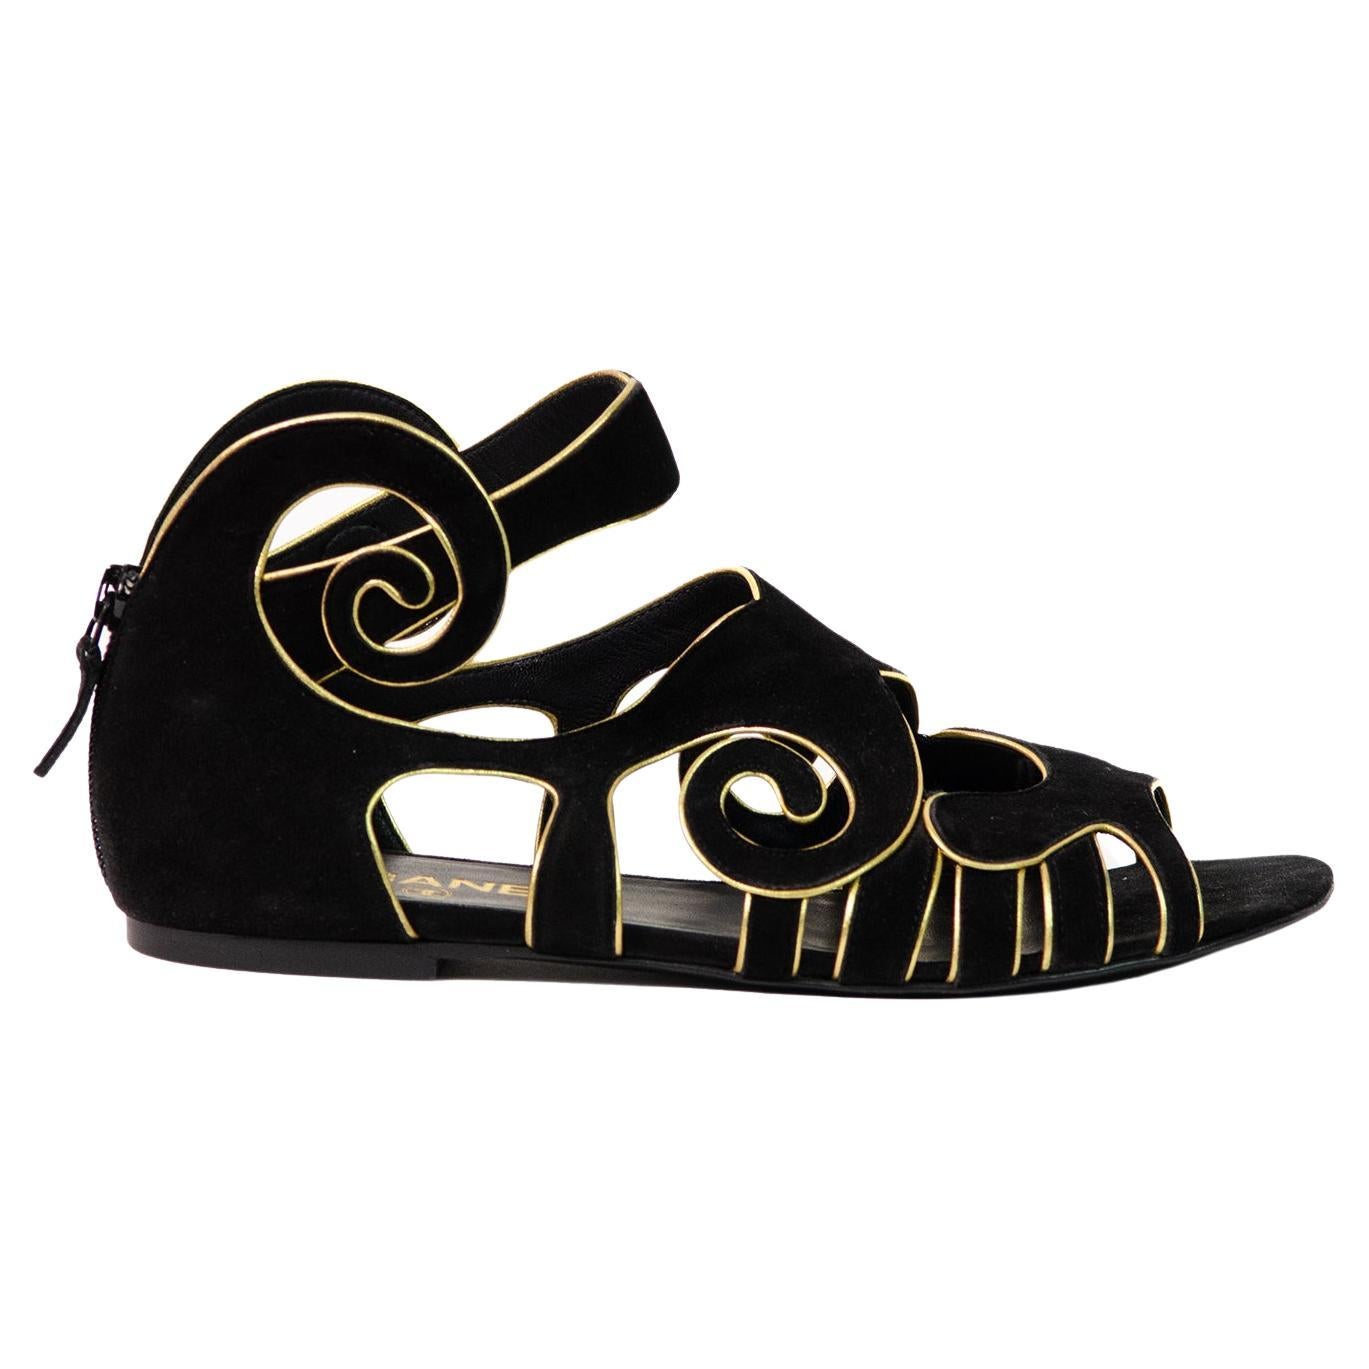 CHANEL BY KARL LAGERFELD Pre Fall 2011 Byzantine Inspired Runway Sandals For Sale